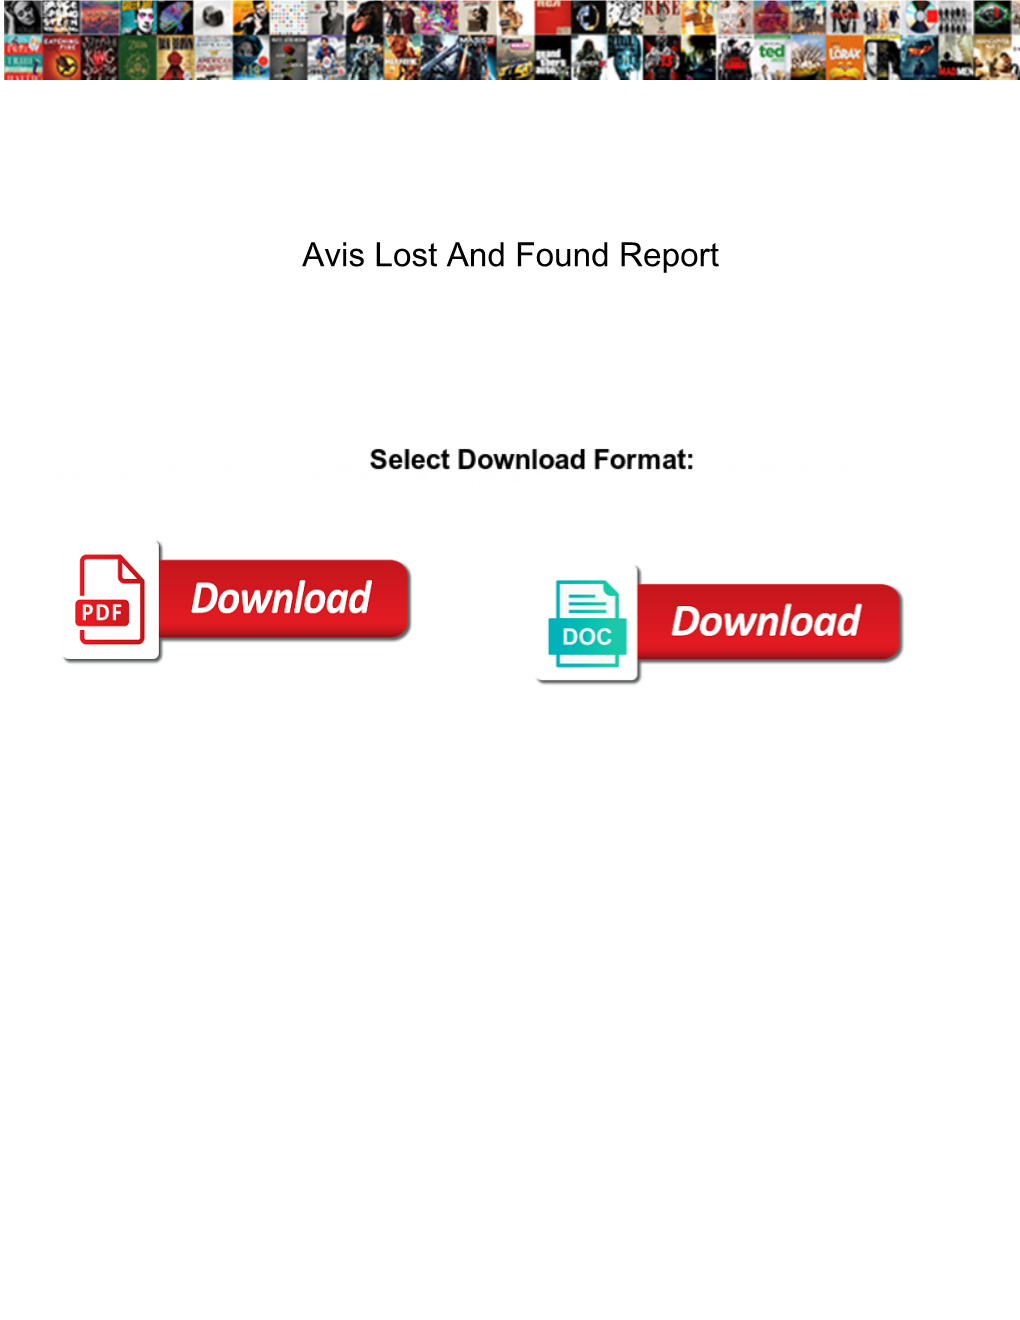 Avis Lost and Found Report